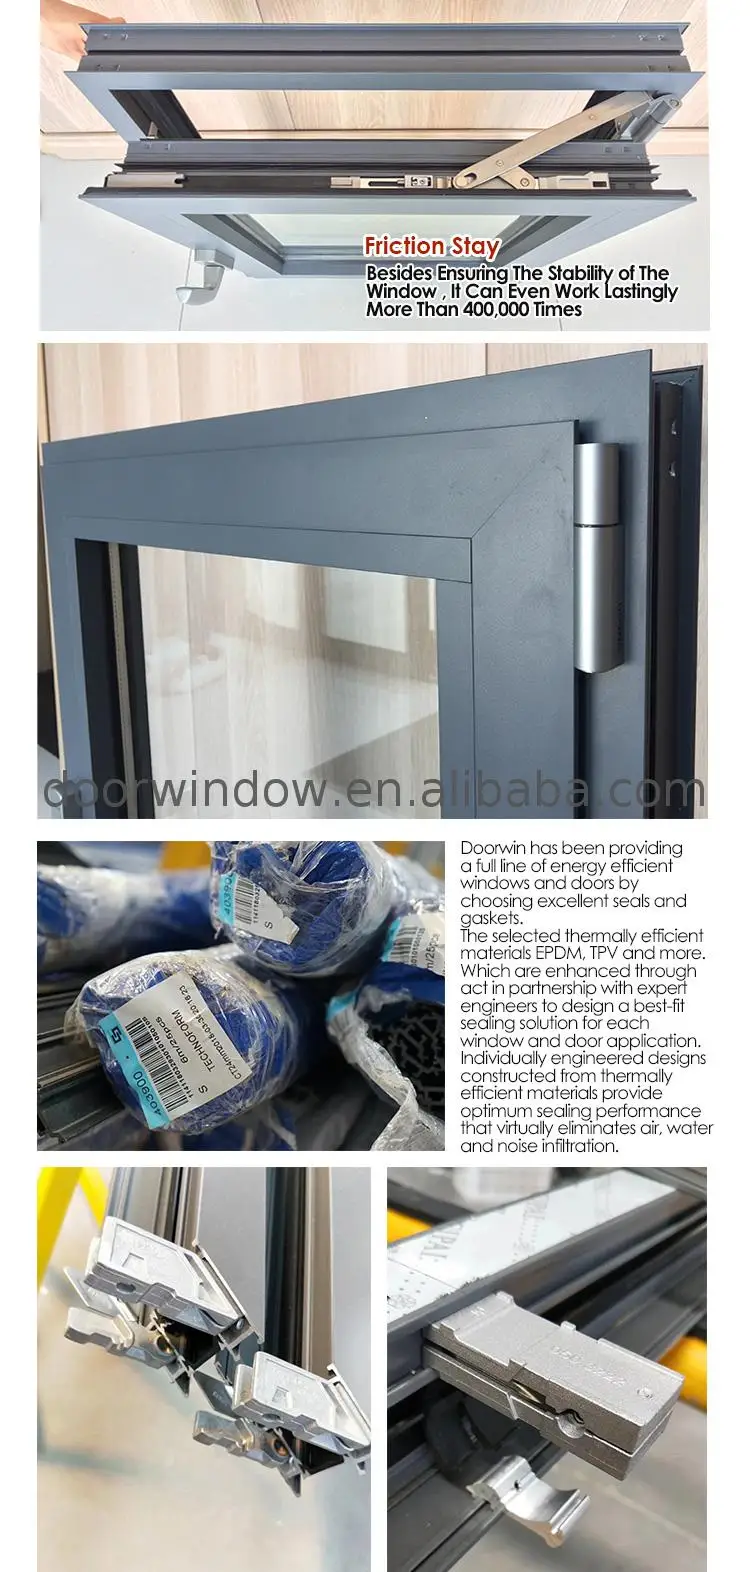 Aluminium casement windows and doors with in swing panes as certificates window sub frame top head